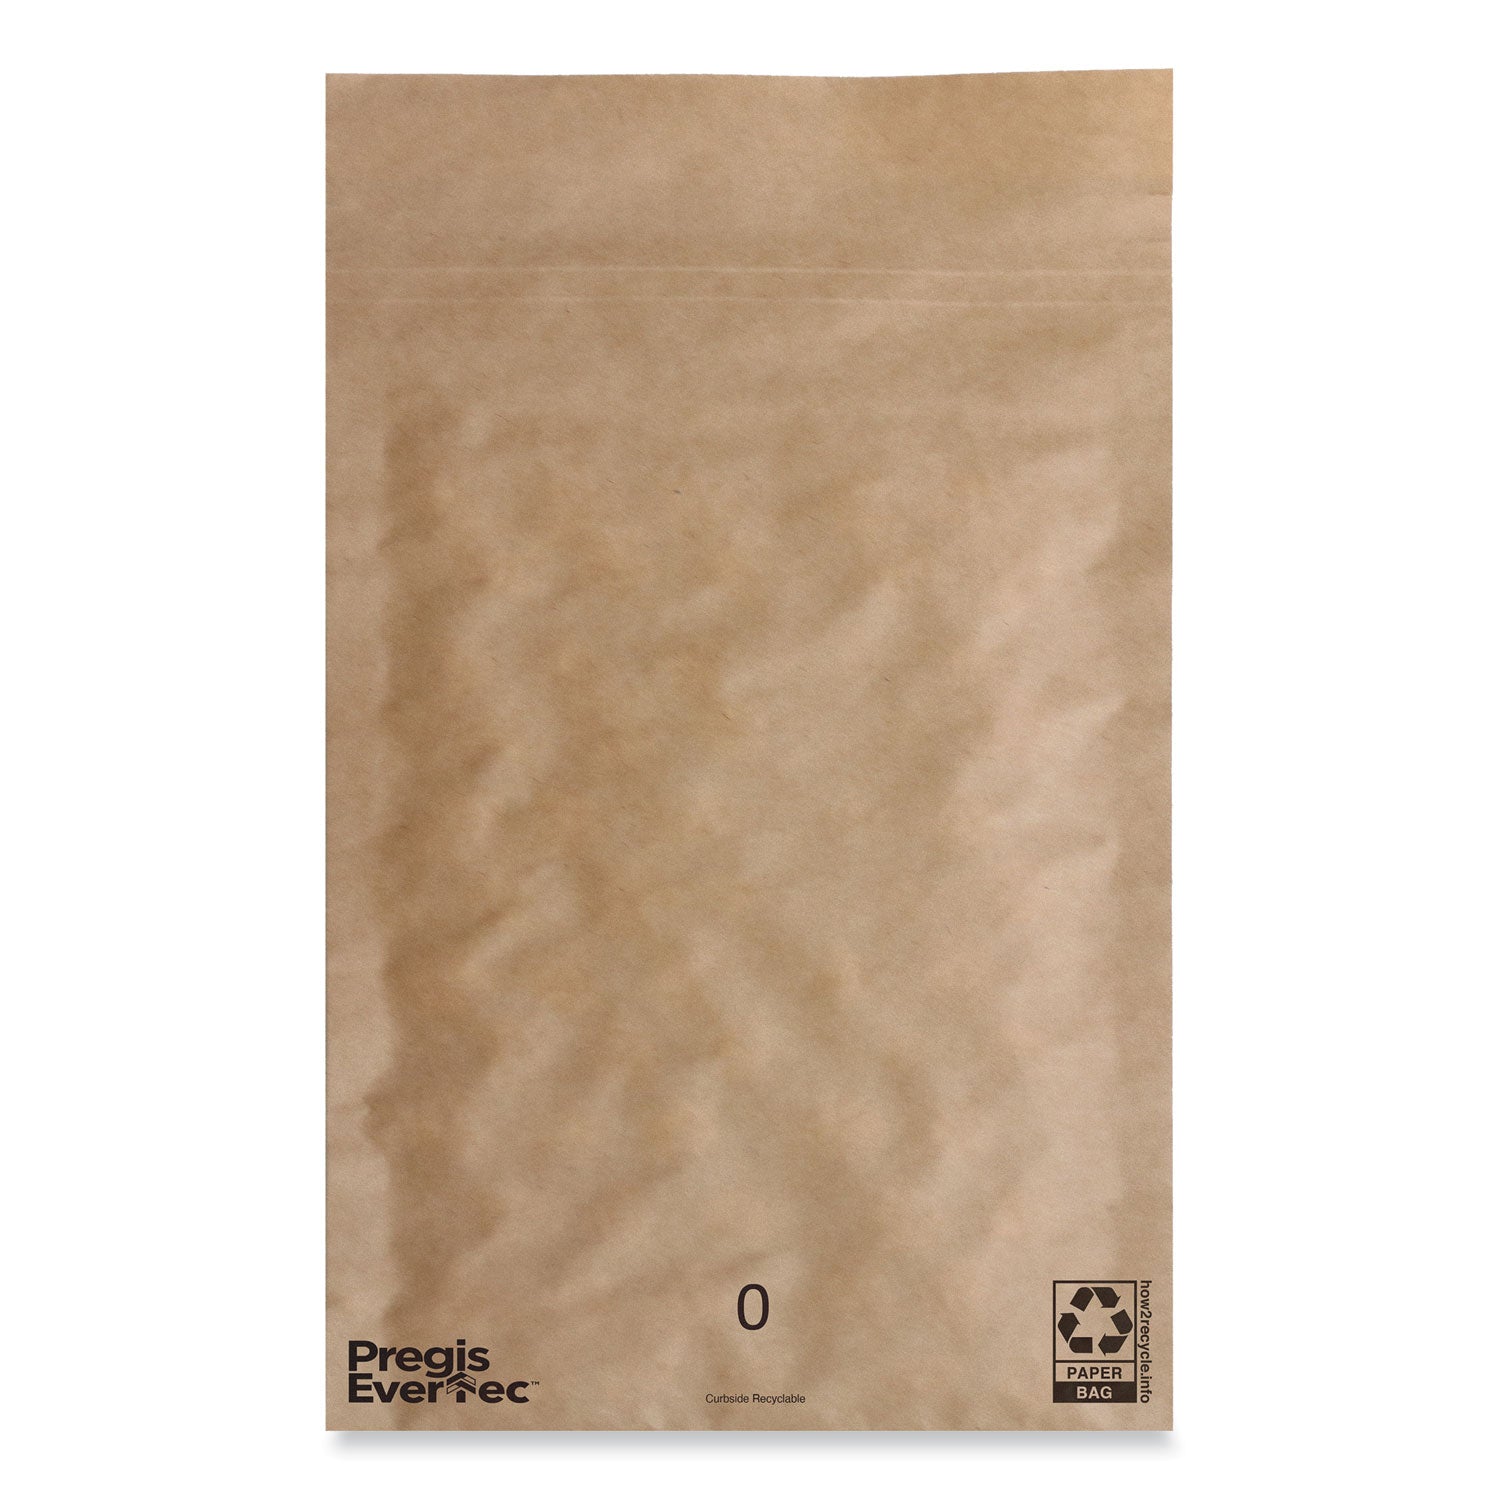 evertec-curbside-recyclable-padded-mailer-#0-kraft-paper-self-adhesive-closure-7-x-9-brown-300-carton_pgs4083813 - 2